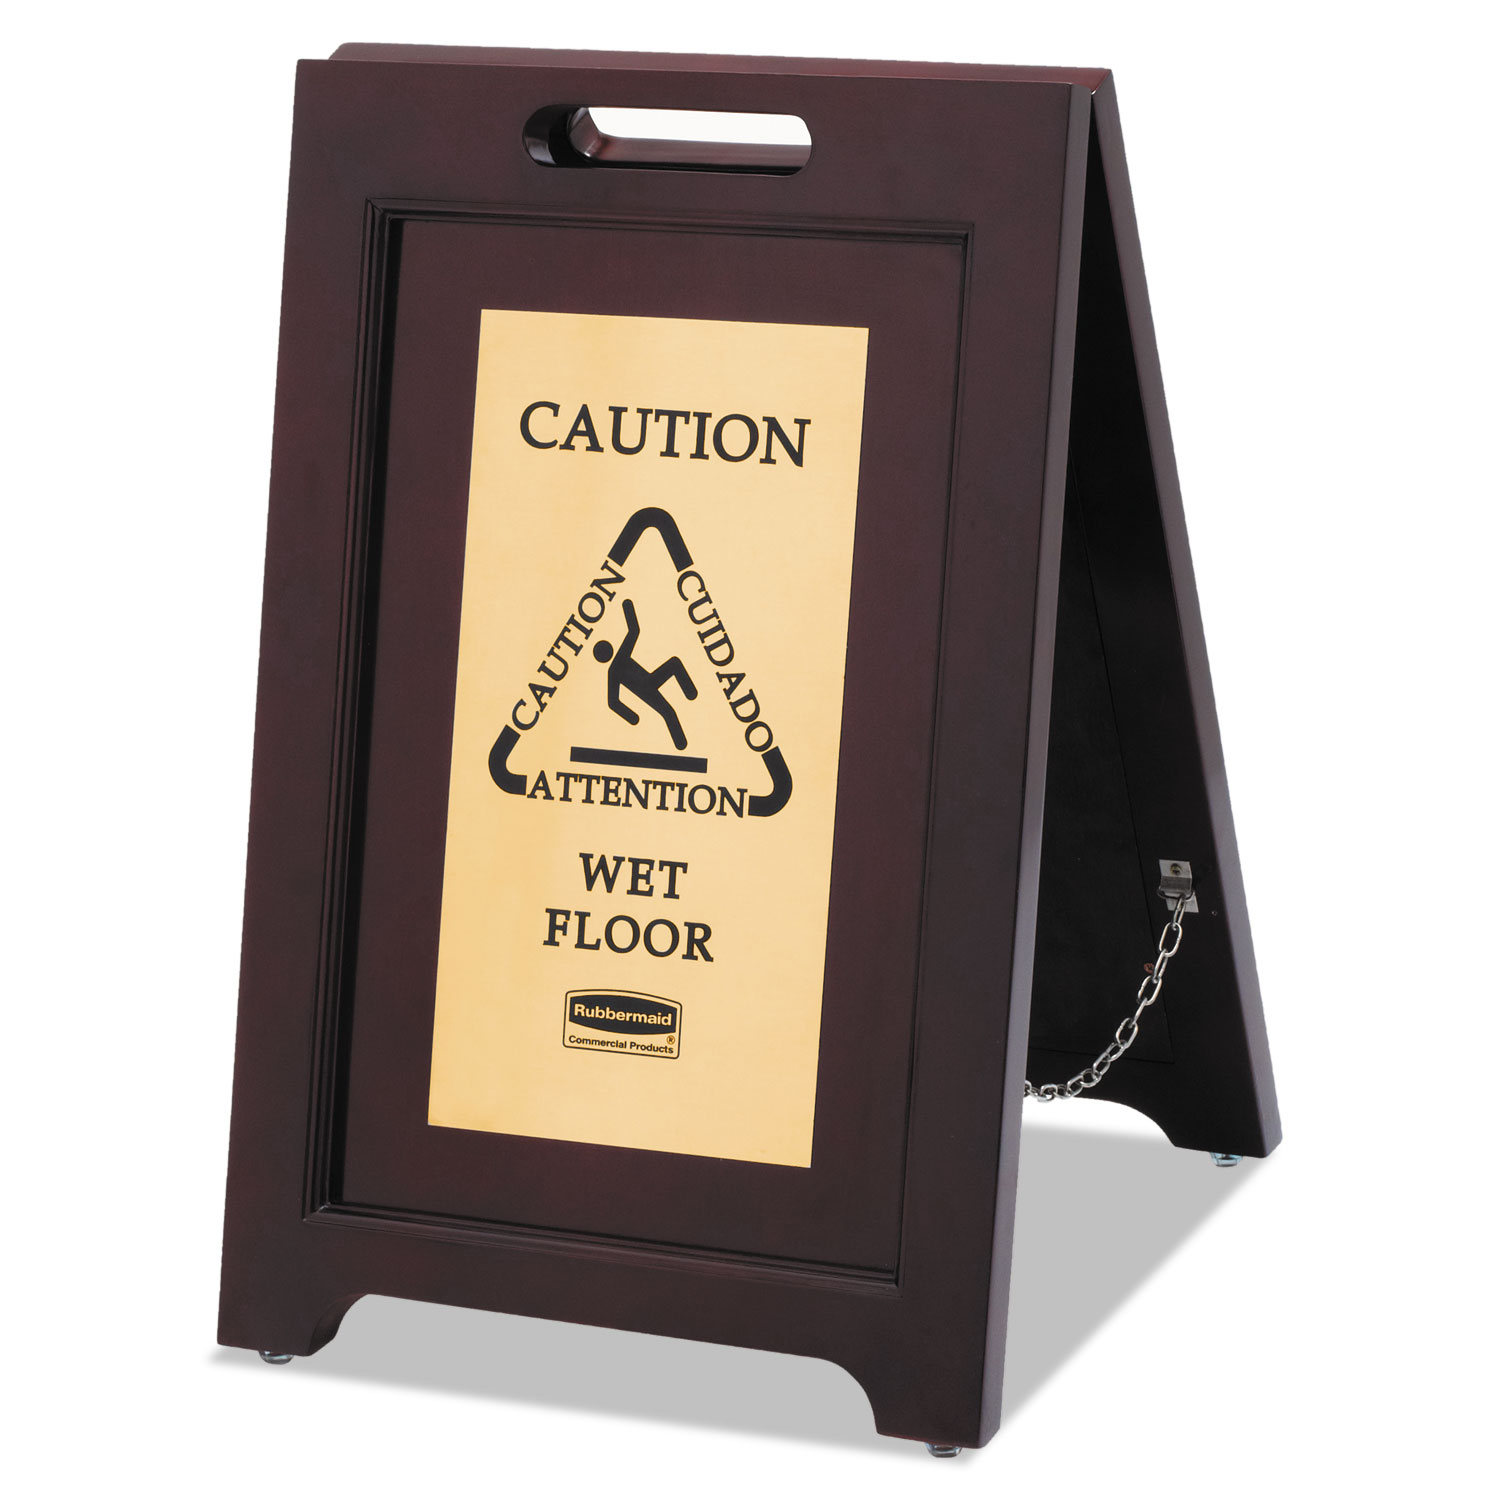  Rubbermaid Commercial 1867507 Executive 2-Sided Multi-Lingual Caution Sign, Brown/Brass, 15 x 23 1/2 (RCP1867507) 